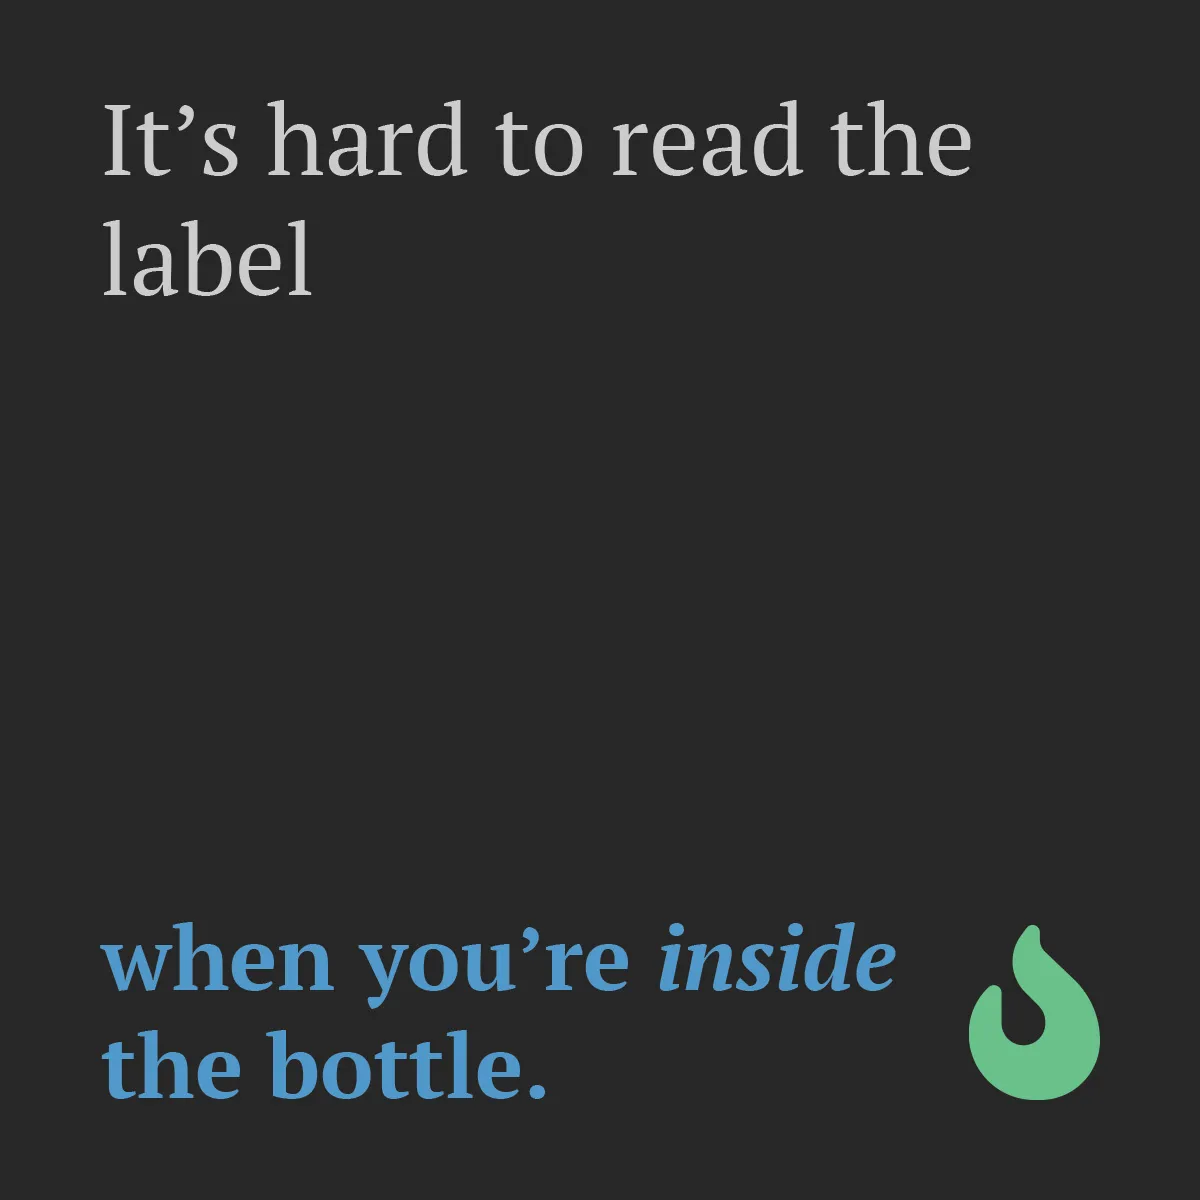 it's hard to read the label when you're inside the bottle